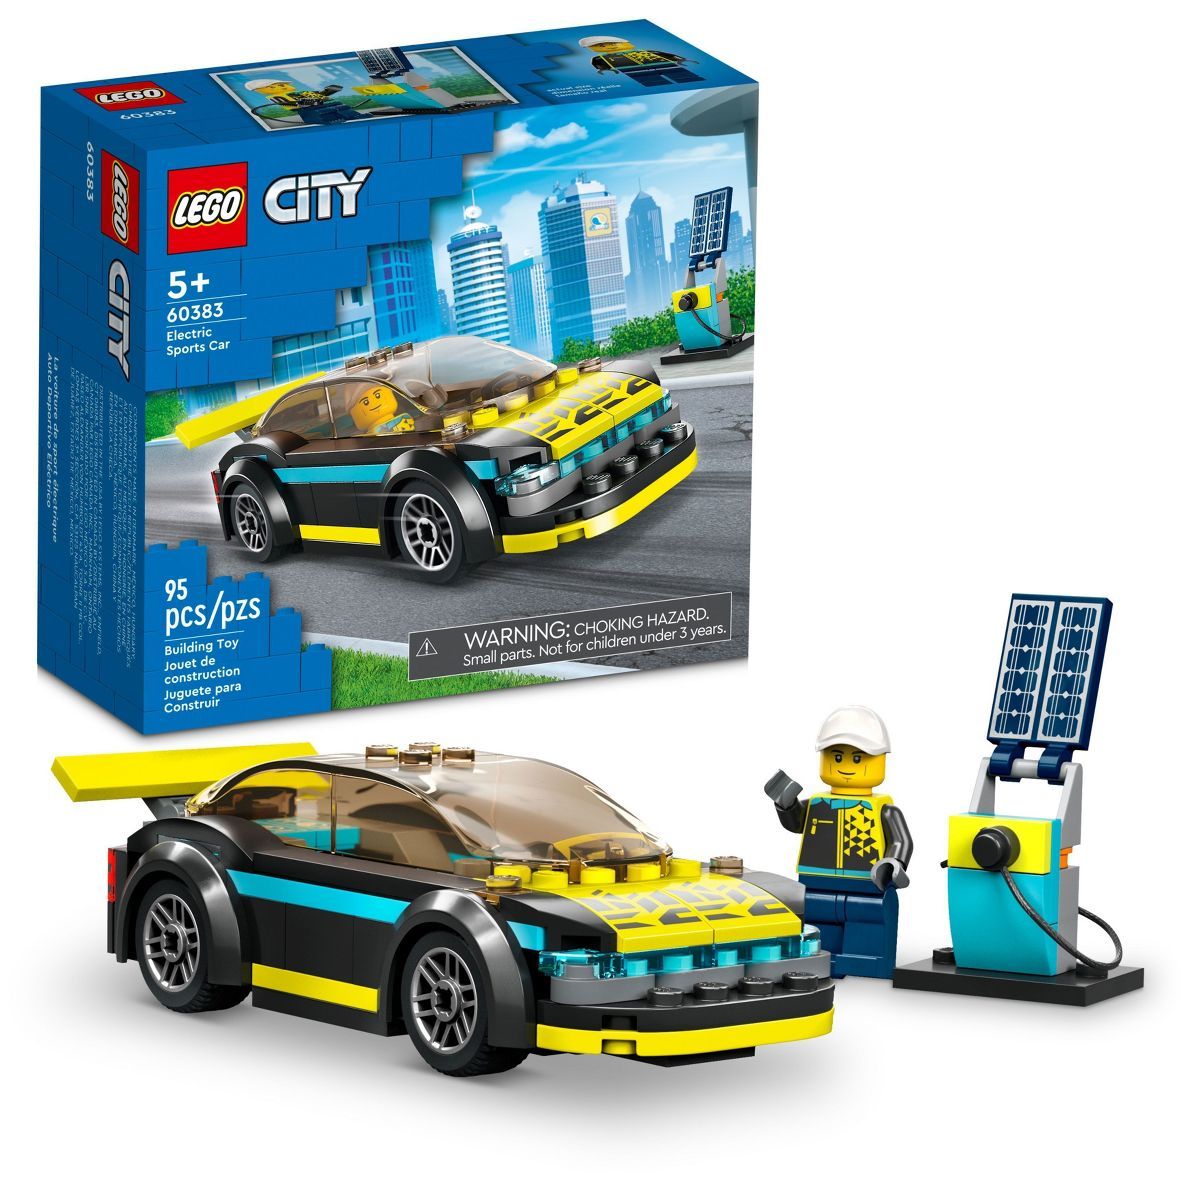 LEGO City Electric Sports Car Building Toy for Kids 60383 | Target